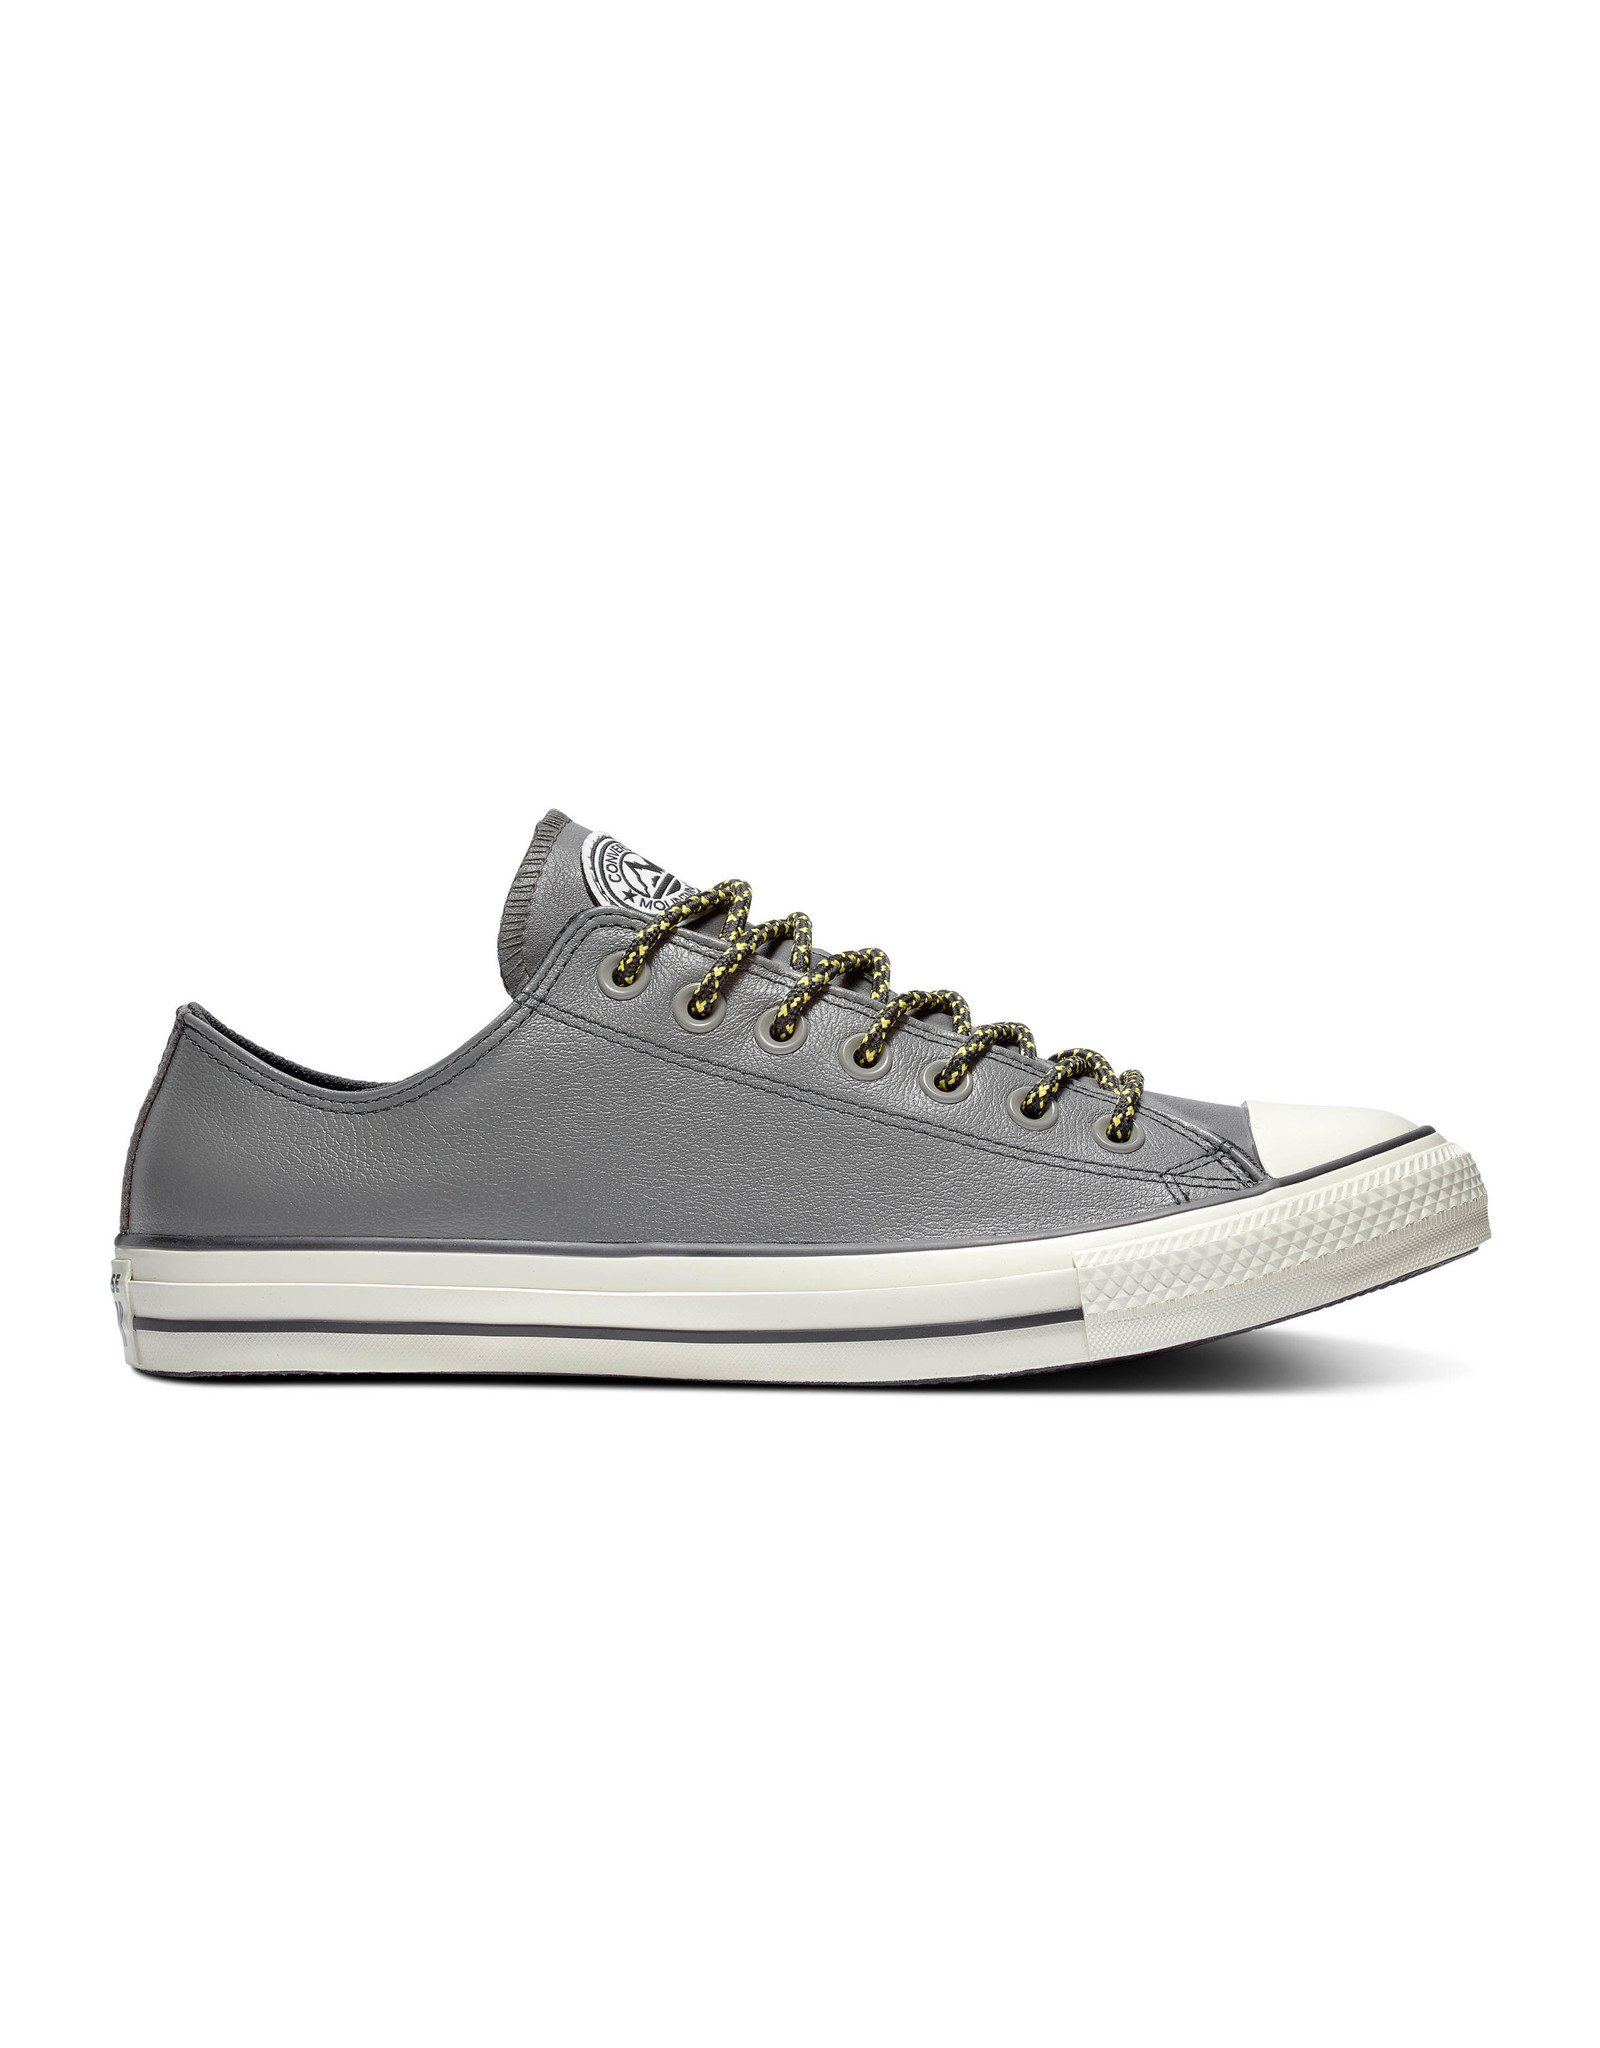 converse chuck taylor ox grey leather